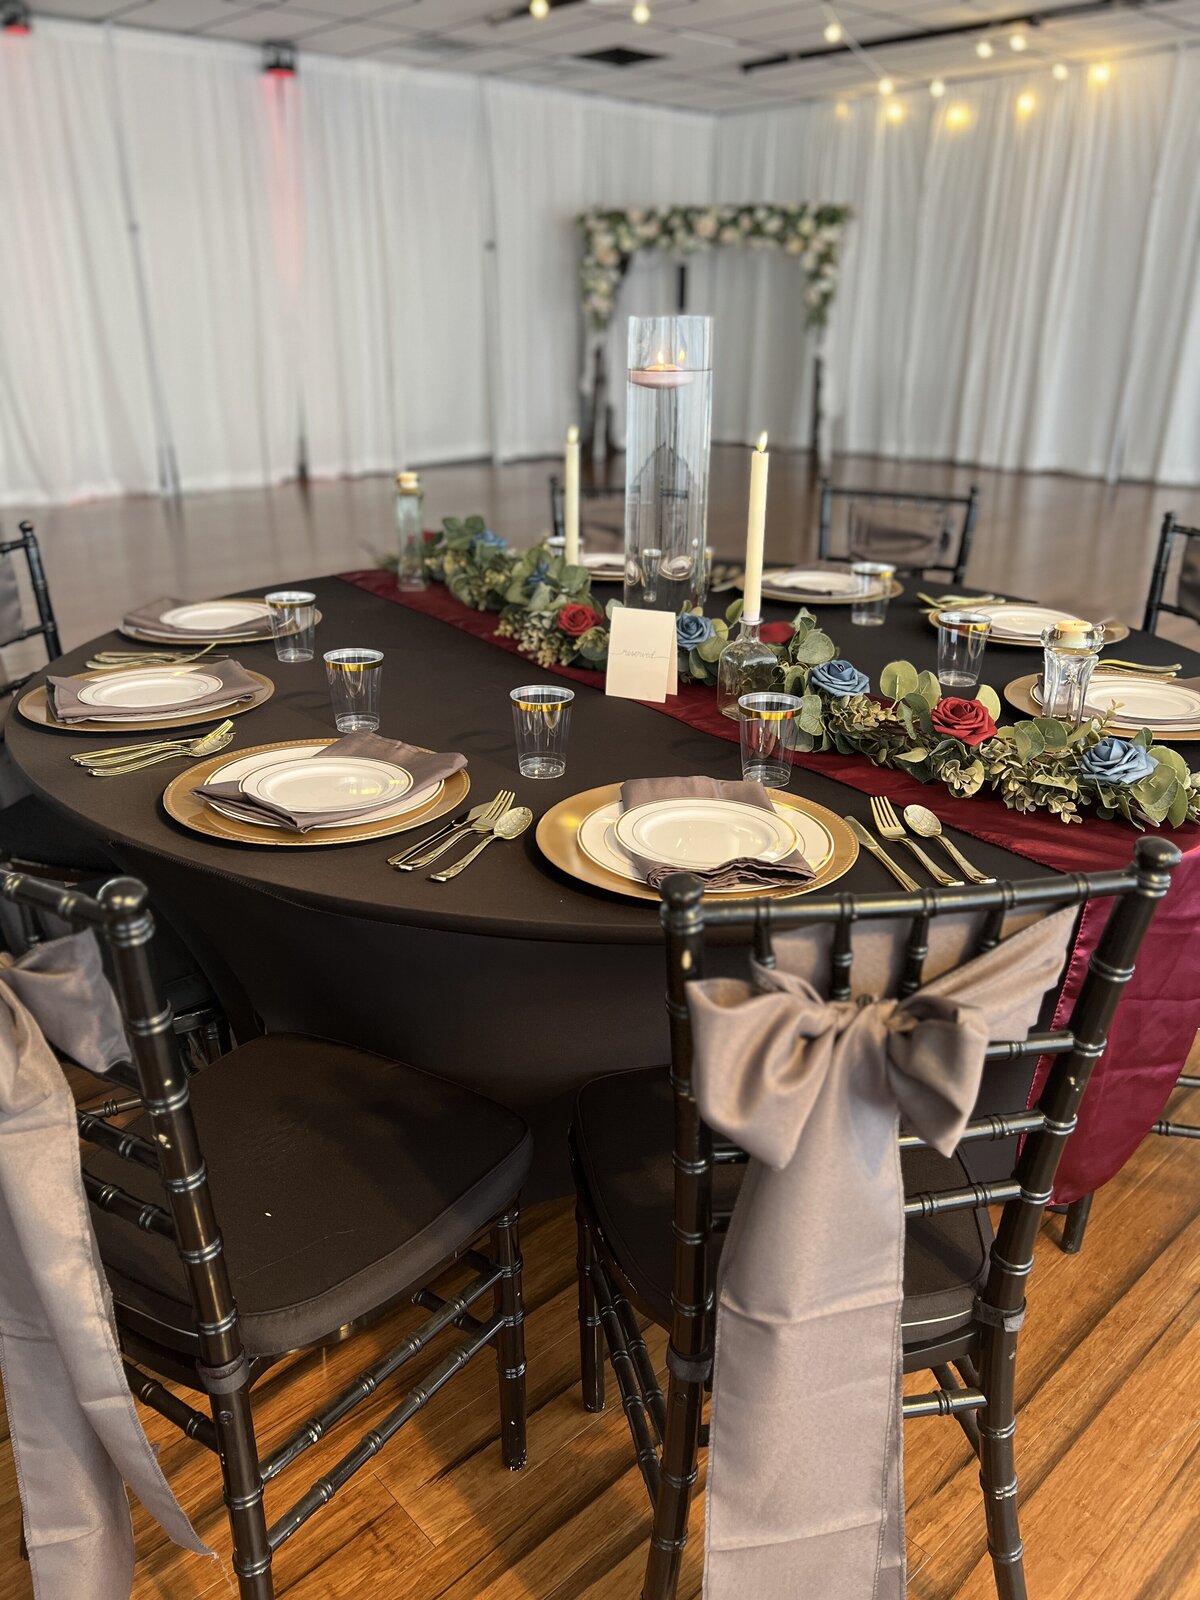 Moody wedding reception guest table with inclusive decor package at Clearwater, Florida event venue - Dark and dramatic ambiance for a memorable celebration